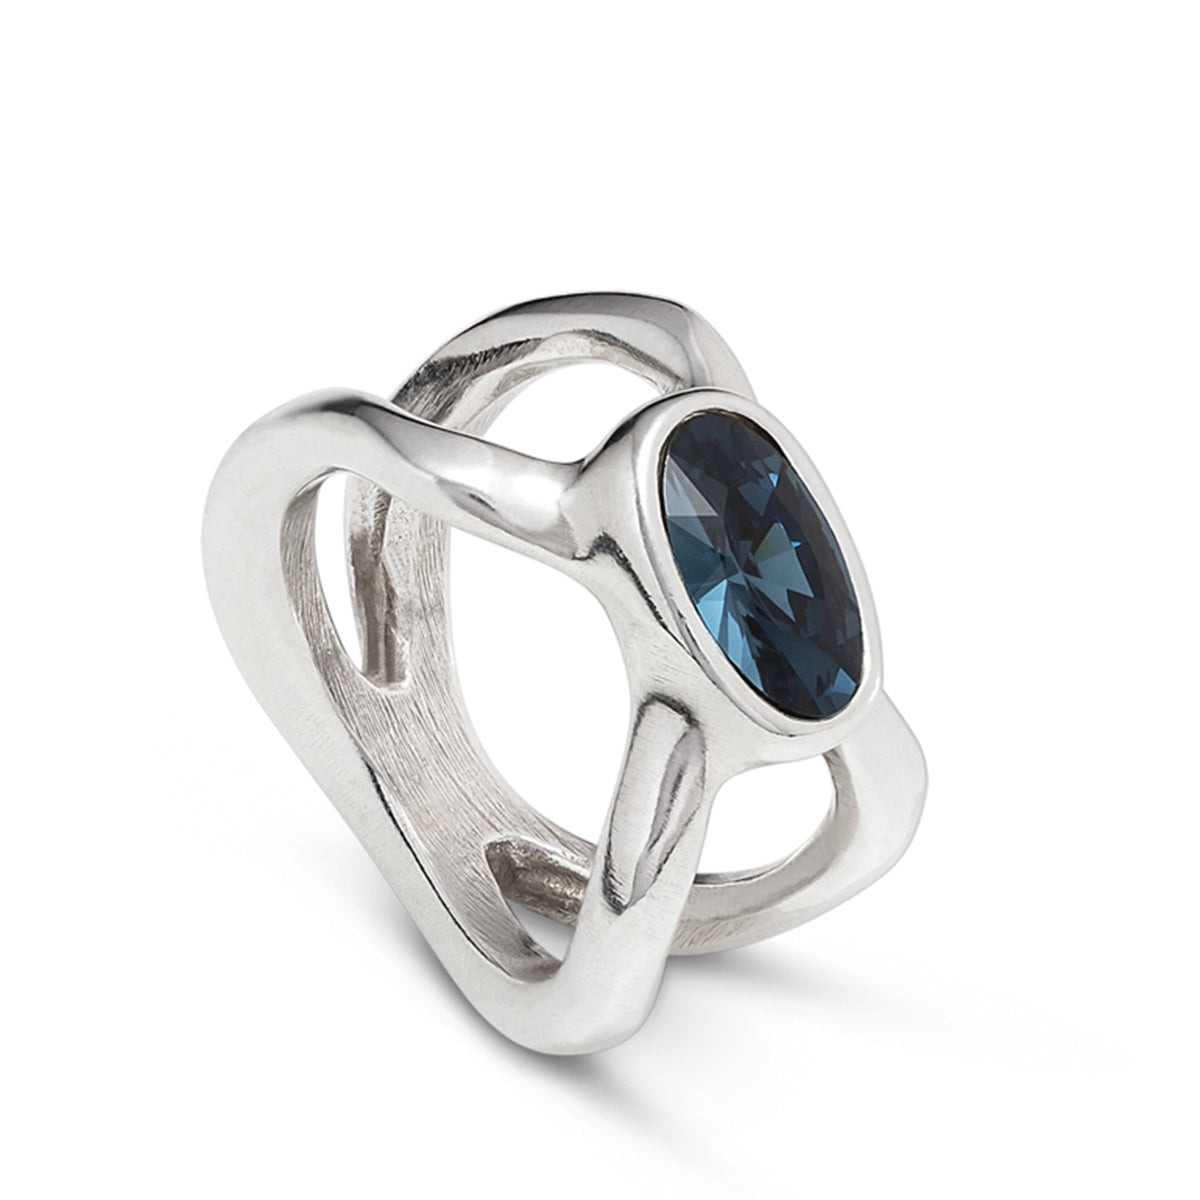 Uno Guardian Ring. Silver-Plated Metal Alloy Ring With Crossed Spider L Shape And Blue Crystal.